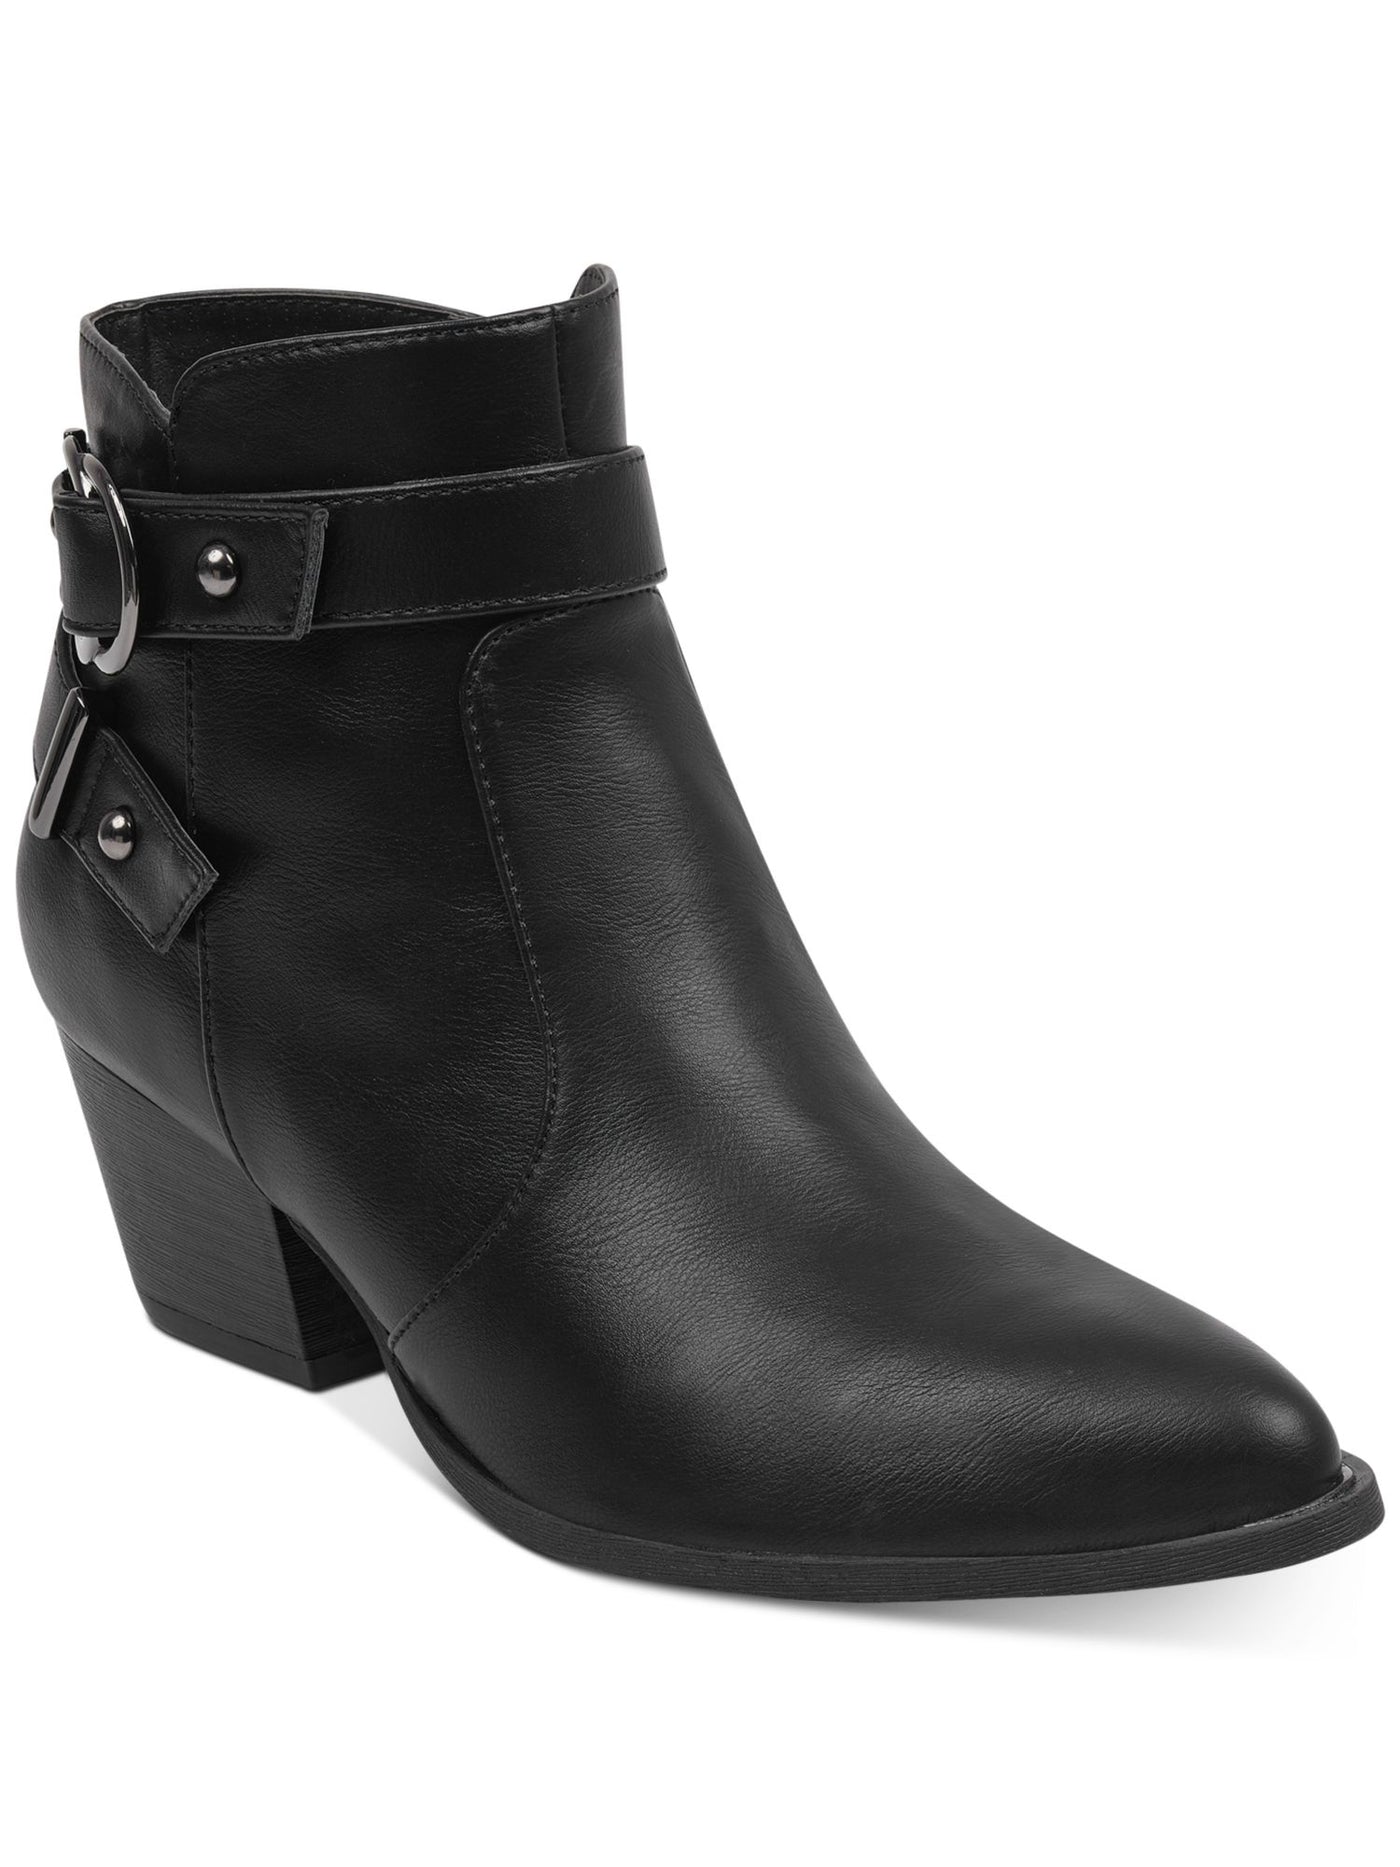 GBG GUESS Womens Black Buckle Accent Studded Illuse Pointed Toe Block Heel Zip-Up Booties 8 M